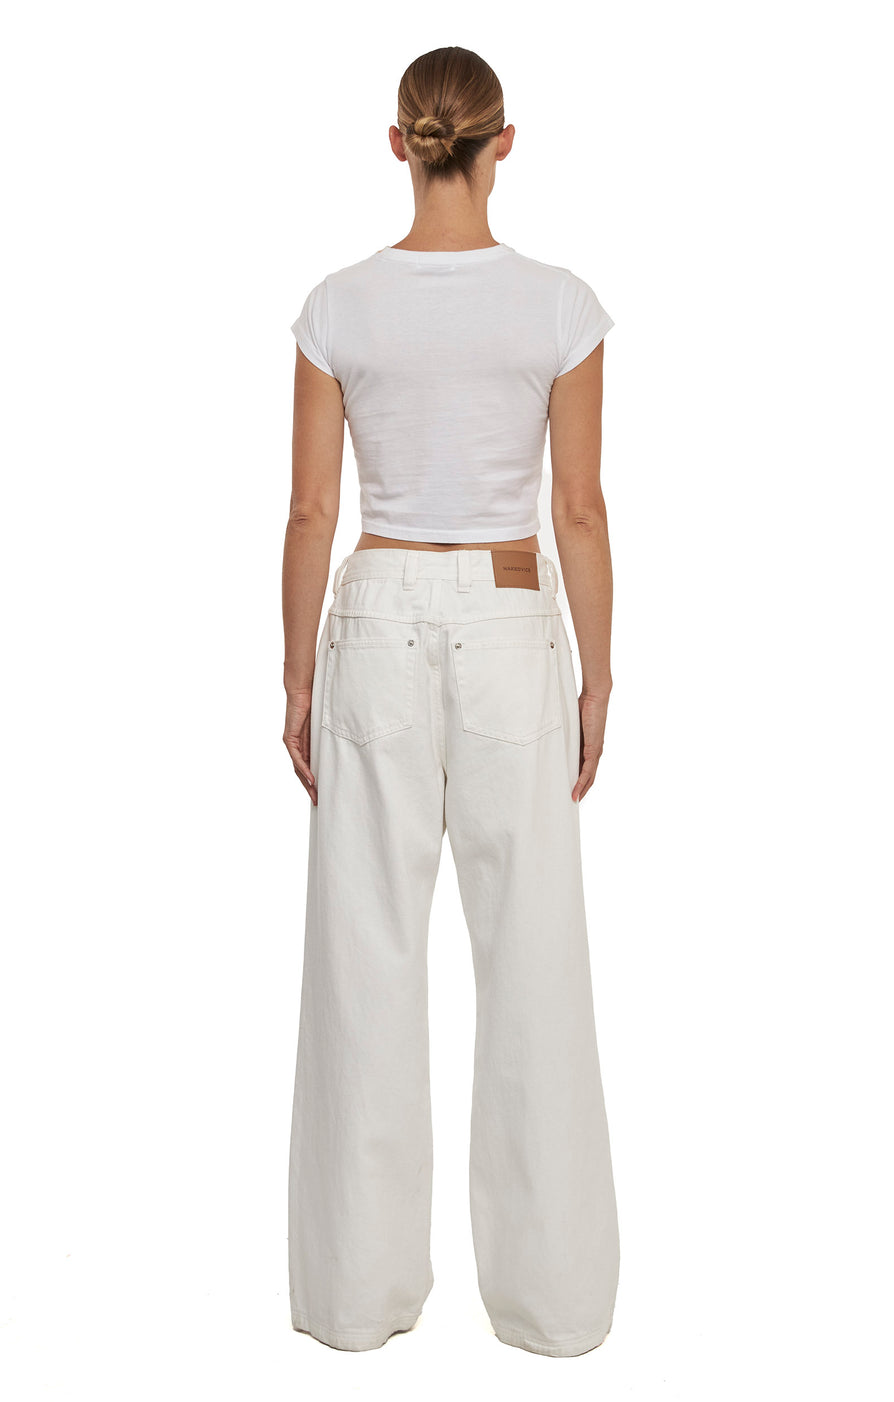 THE MAXWELL WHITE JEAN